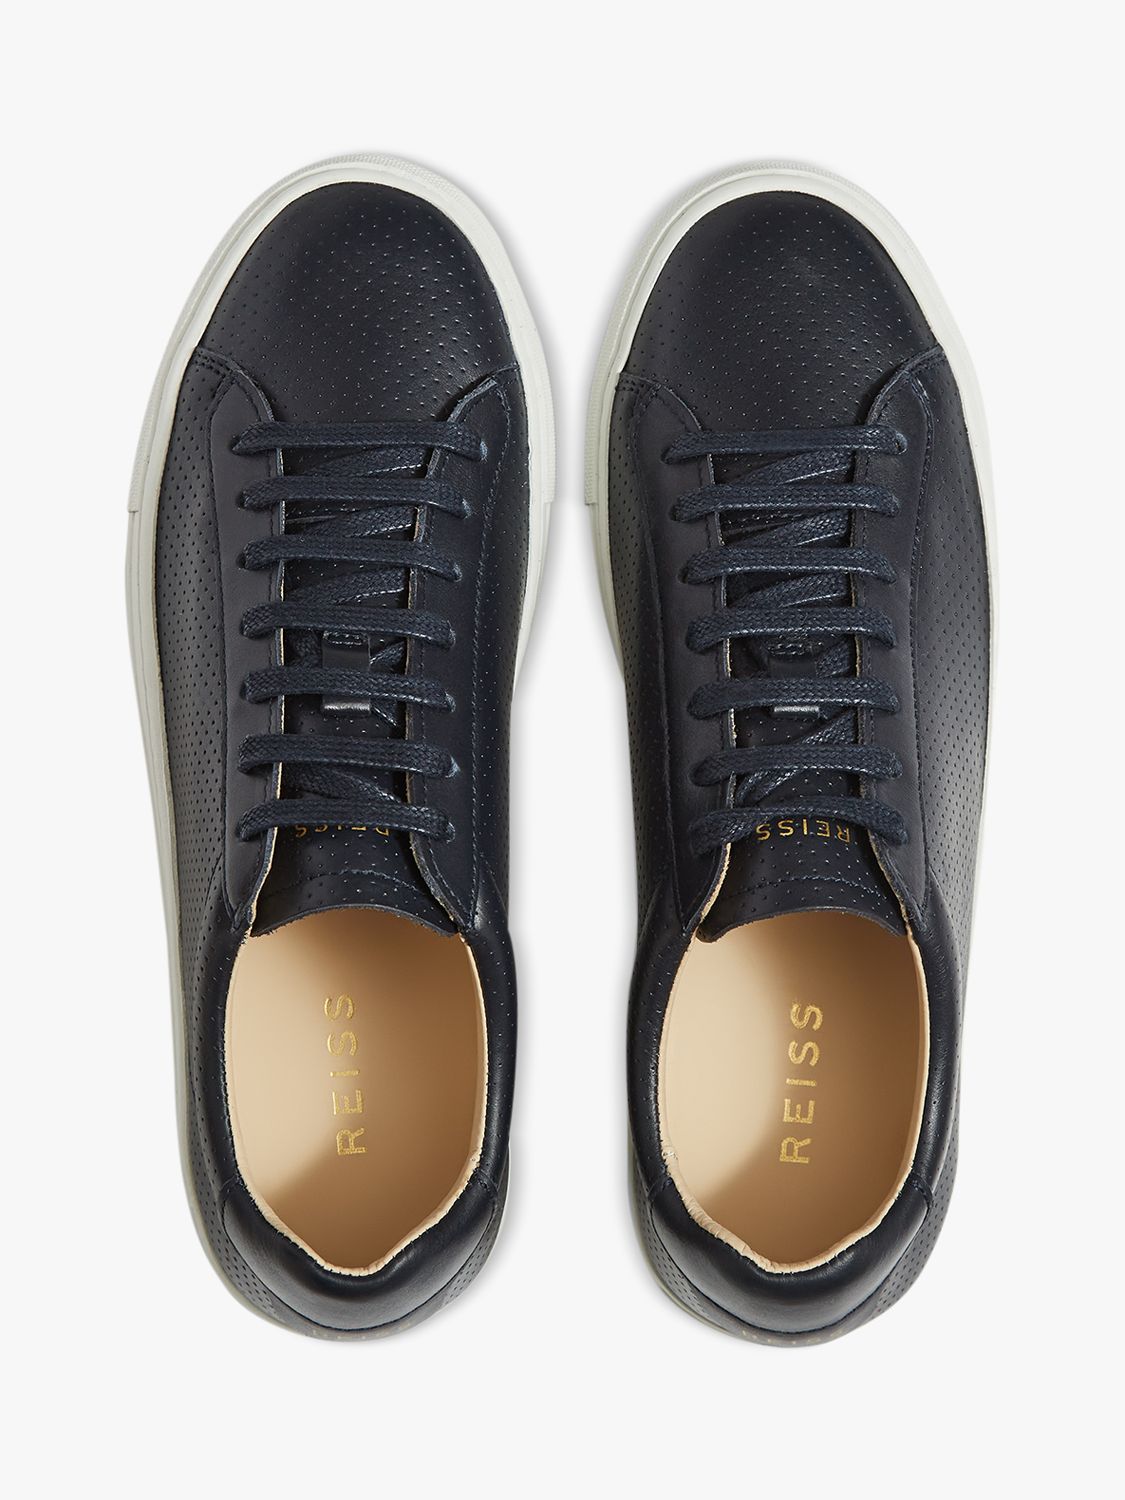 Reiss Finley Leather Perforated Trainers, Navy